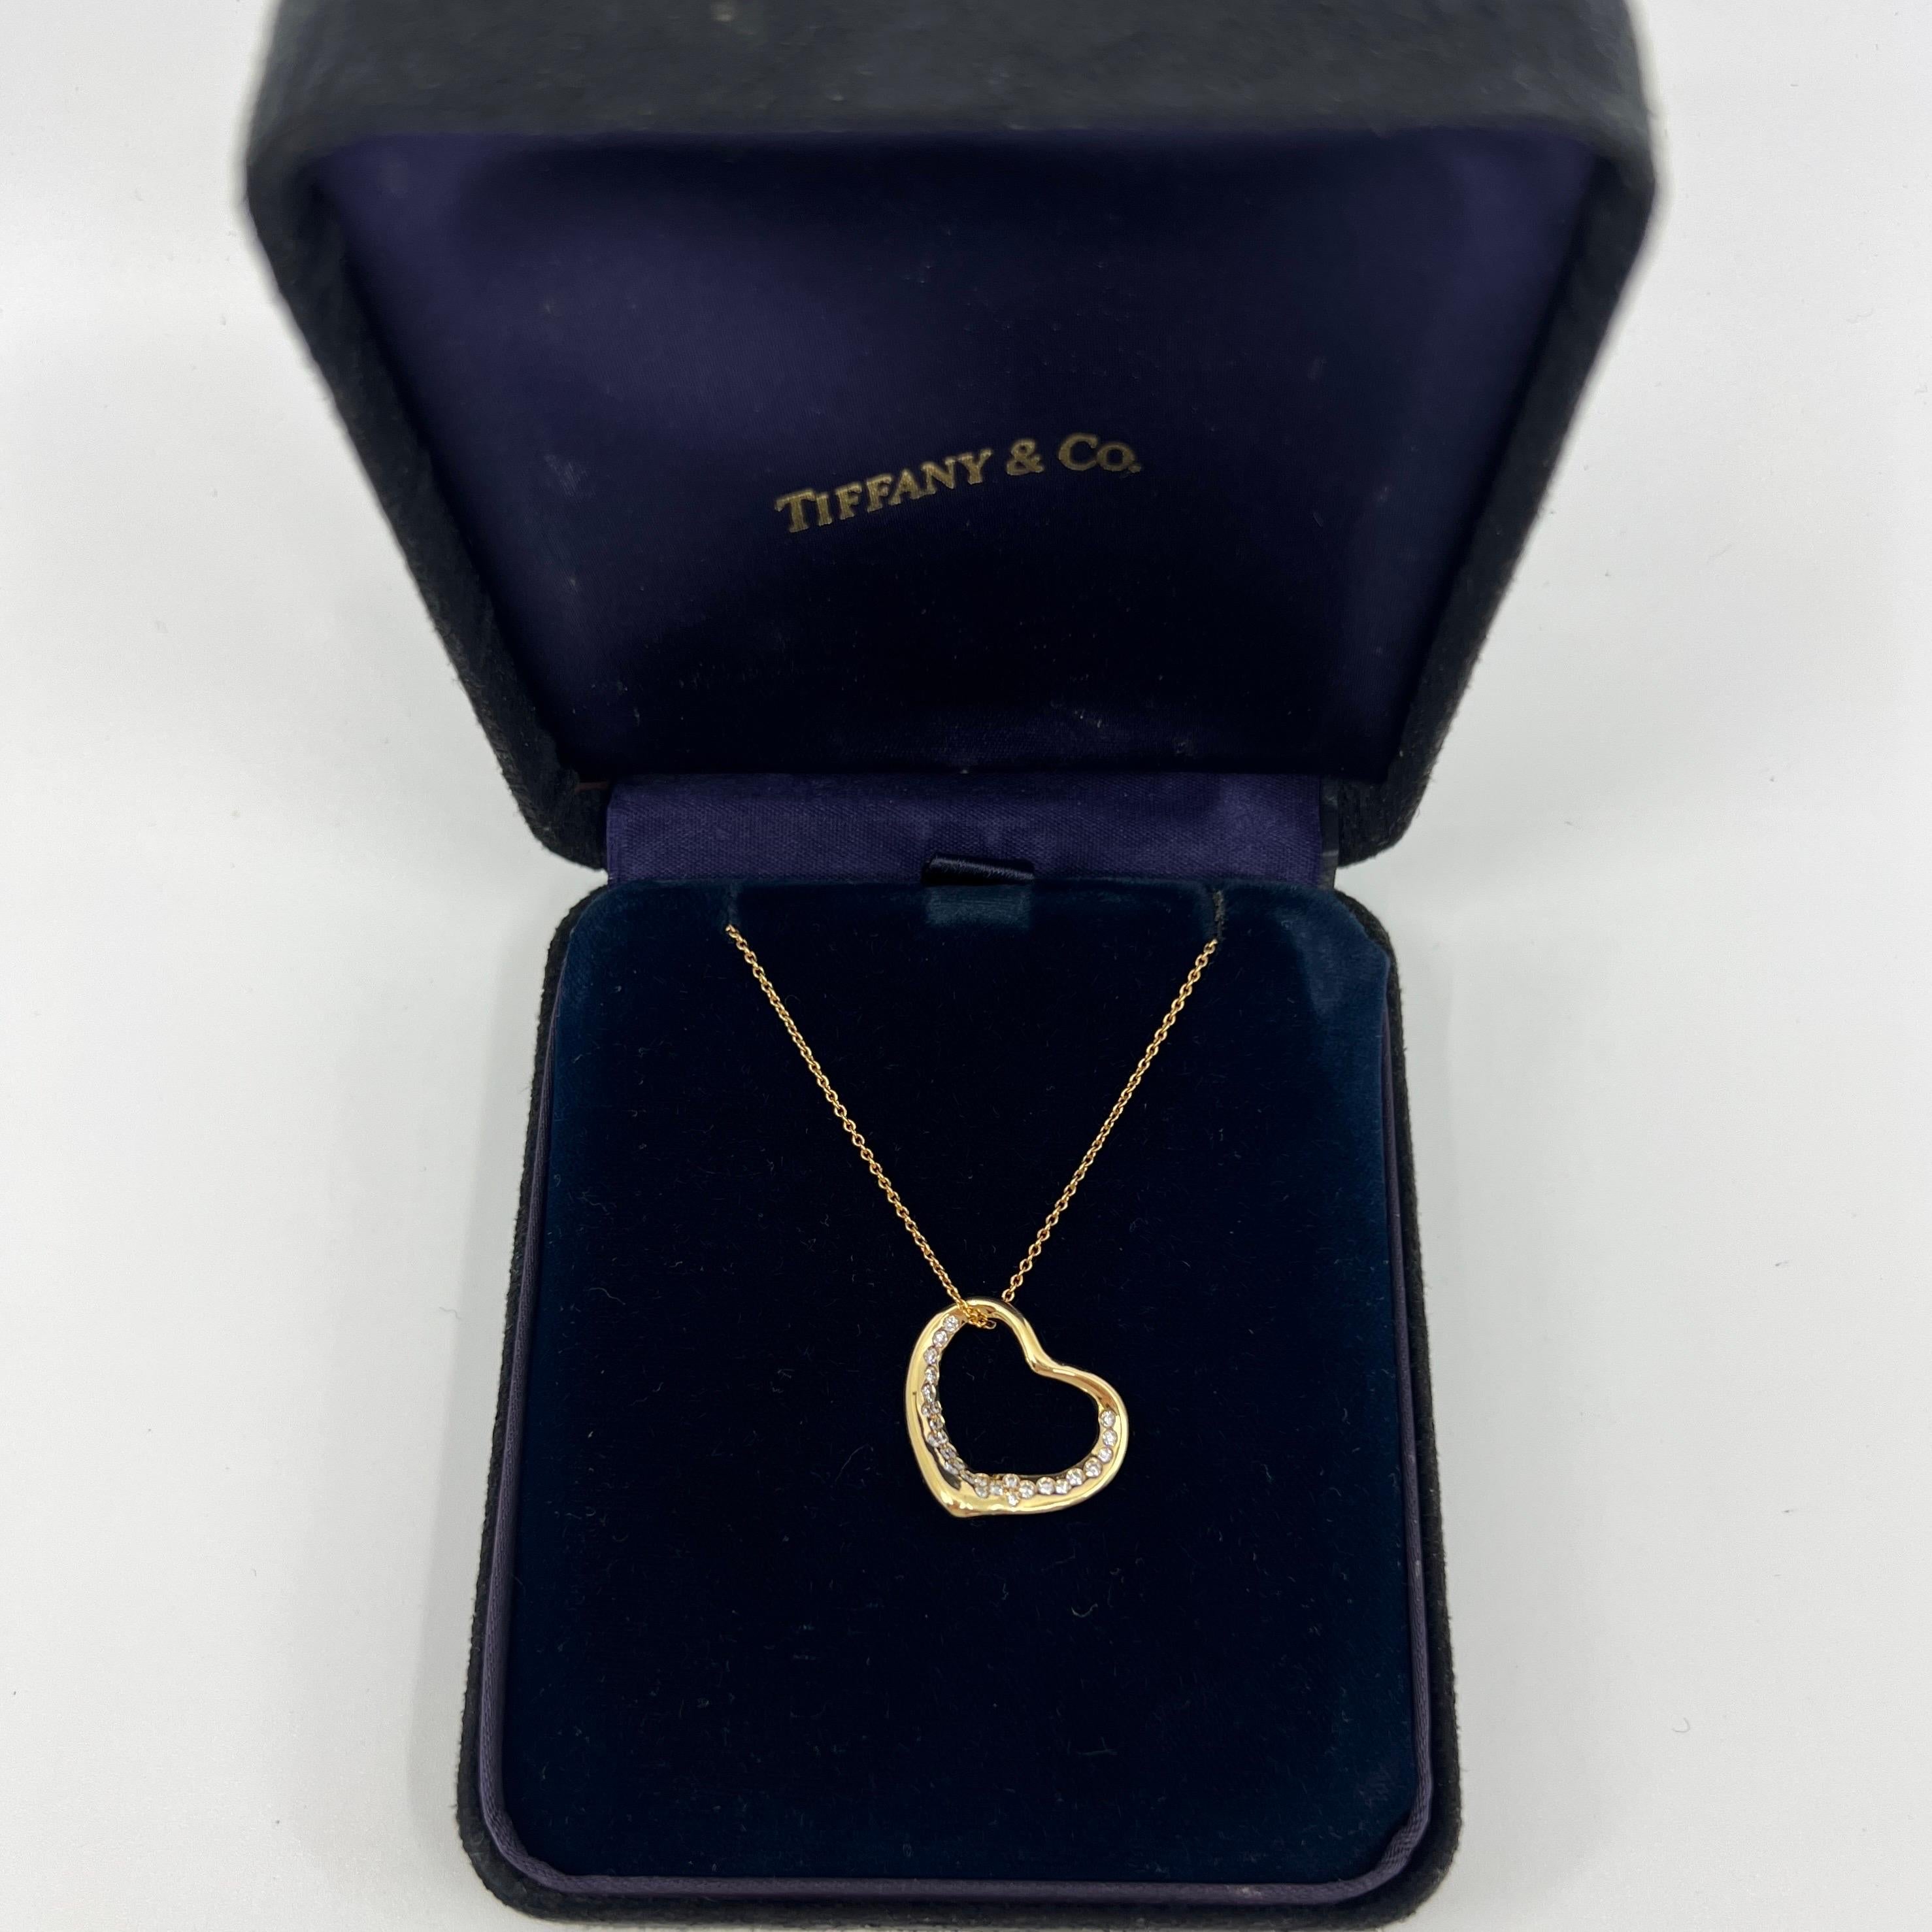 Vintage Tiffany & Co. Elsa Peretti Large Open Heart Diamond 18k Yellow Gold Pendant Necklace.

A beautiful and rare authentic Tiffany & Co open heart pendant from the stylish and popular Elsa Peretti range. Large size pendant.

This pendant is set